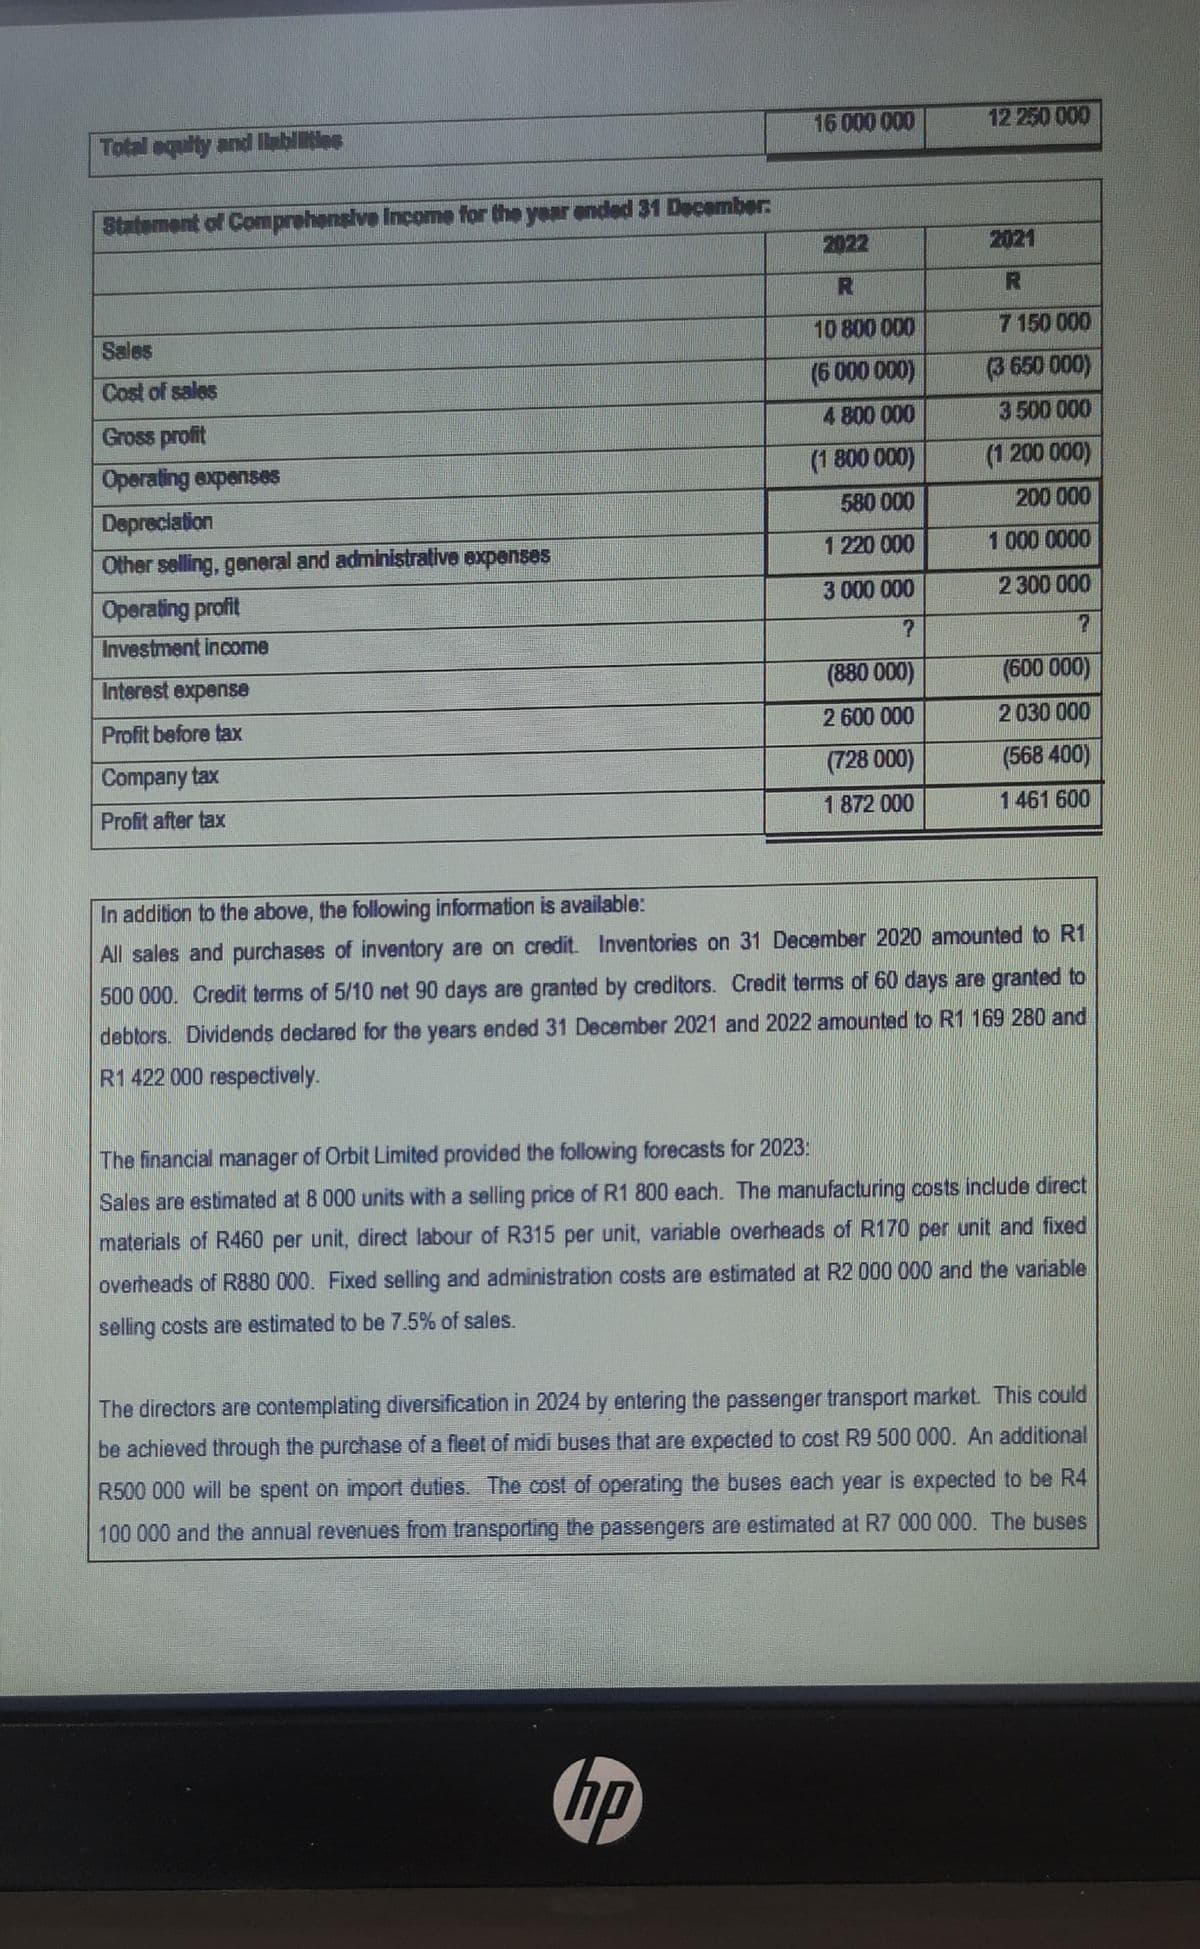 Total equity and liabilities
Statement of Comprehensive Income for the year ended 31 December:
Sales
Cost of sales
Gross profit
Operating expenses
Depreciation
Other selling, general and administrative expenses
Operating profit
Investment income
Interest expense
Profit before tax
Company tax
Profit after tax
16 000 000
R
10 800 000
(6 000 000)
4 800 000
(1 800 000)
580 000
1 220 000
hp
3 000 000
?
(880 000)
2 600 000
(728 000)
1 872 000
12 250 000
2021
R
7 150 000
(3 650 000)
3 500 000
(1 200 000)
200 000
1 000 0000
2 300 000
?
(600 000)
2 030 000
(568 400)
1461 600
In addition to the above, the following information is available:
All sales and purchases of inventory are on credit. Inventories on 31 December 2020 amounted to R1
500 000. Credit terms of 5/10 net 90 days are granted by creditors. Credit terms of 60 days are granted to
debtors. Dividends declared for the years ended 31 December 2021 and 2022 amounted to R1 169 280 and
R1 422 000 respectively.
The financial manager of Orbit Limited provided the following forecasts for 2023:
Sales are estimated at 8 000 units with a selling price of R1 800 each. The manufacturing costs include direct
materials of R460 per unit, direct labour of R315 per unit, variable overheads of R170 per unit and fixed
overheads of R880 000. Fixed selling and administration costs are estimated at R2 000 000 and the variable
selling costs are estimated to be 7.5% of sales.
The directors are contemplating diversification in 2024 by entering the passenger transport market. This could
be achieved through the purchase of a fleet of midi buses that are expected to cost R9 500 000. An additional
R500 000 will be spent on import duties. The cost of operating the buses each year is expected to be R4
100 000 and the annual revenues from transporting the passengers are estimated at R7 000 000. The buses